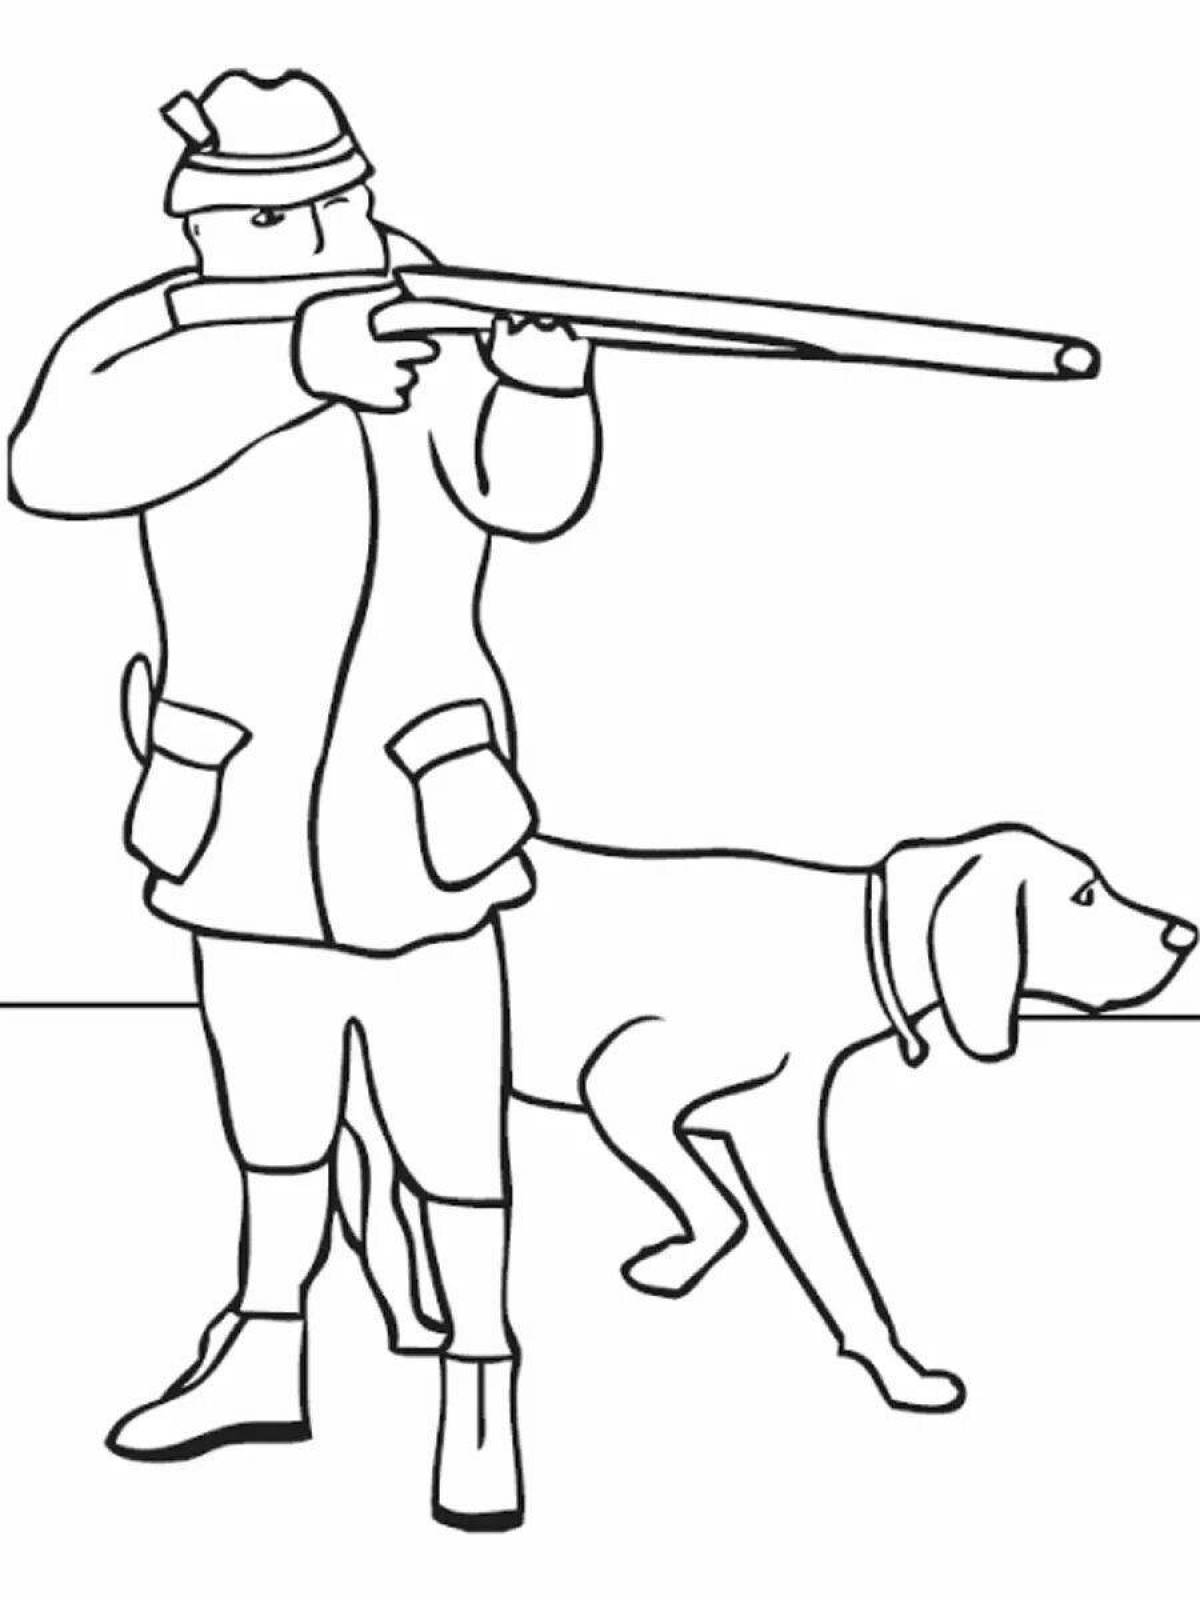 Coloring book brave hunter with a gun